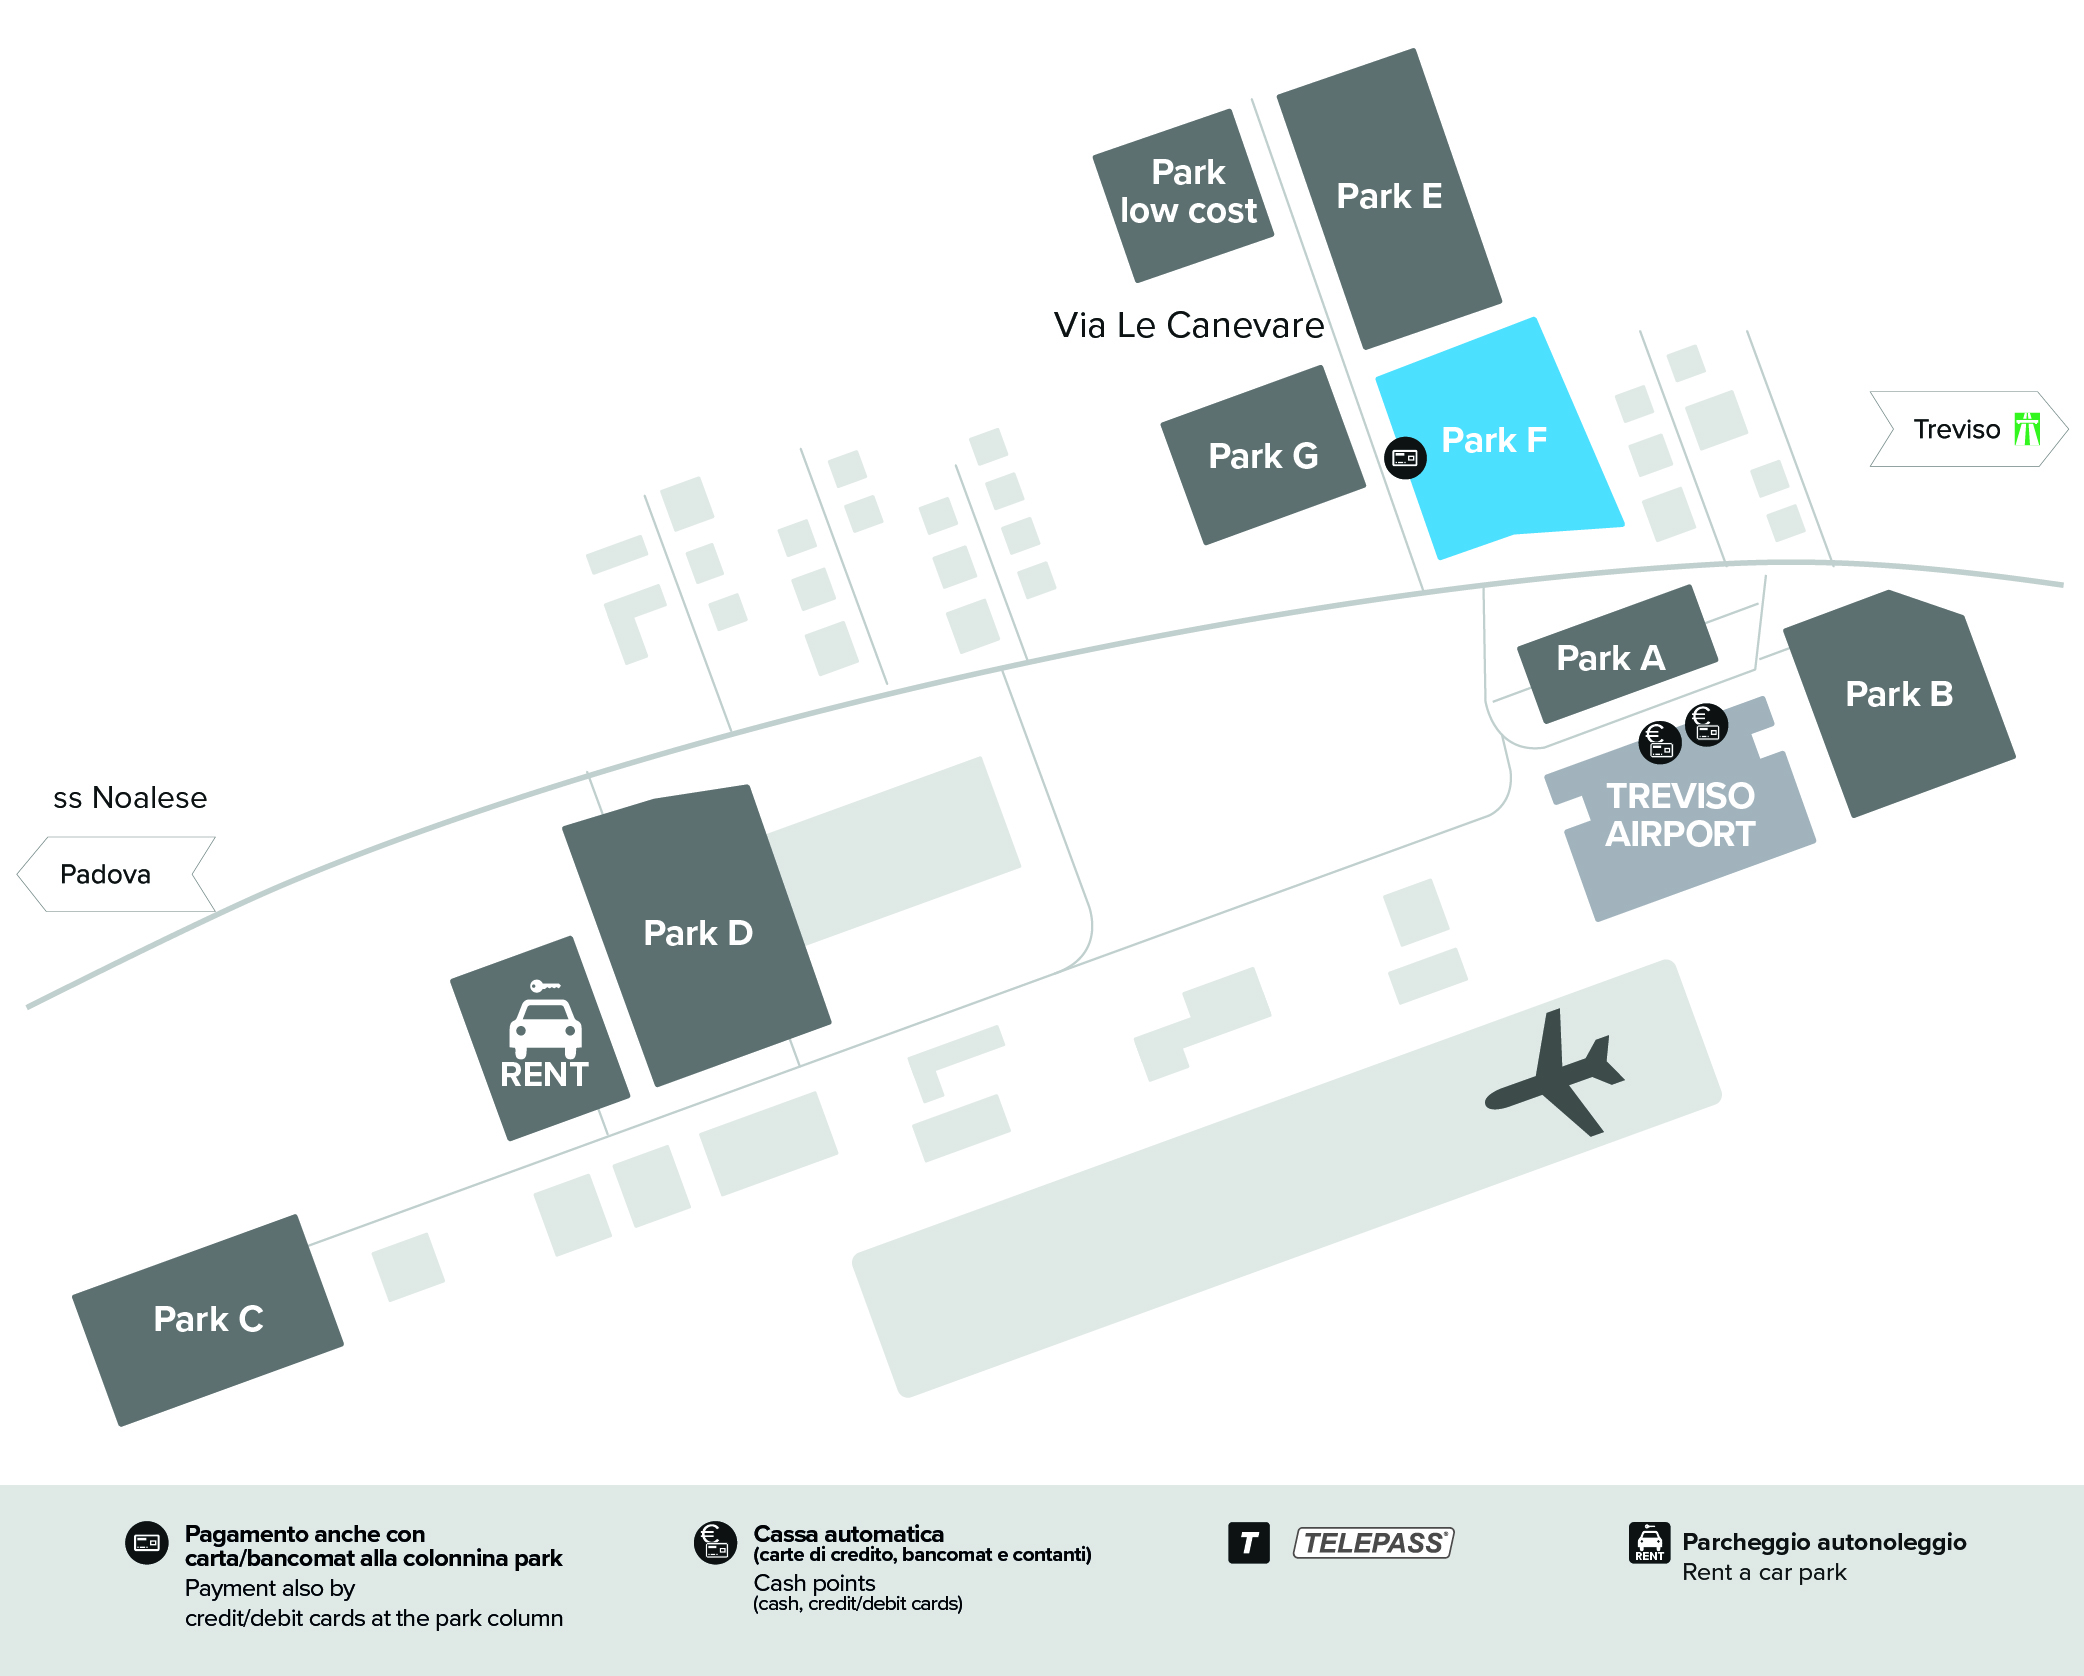 Treviso airport parking Park F map